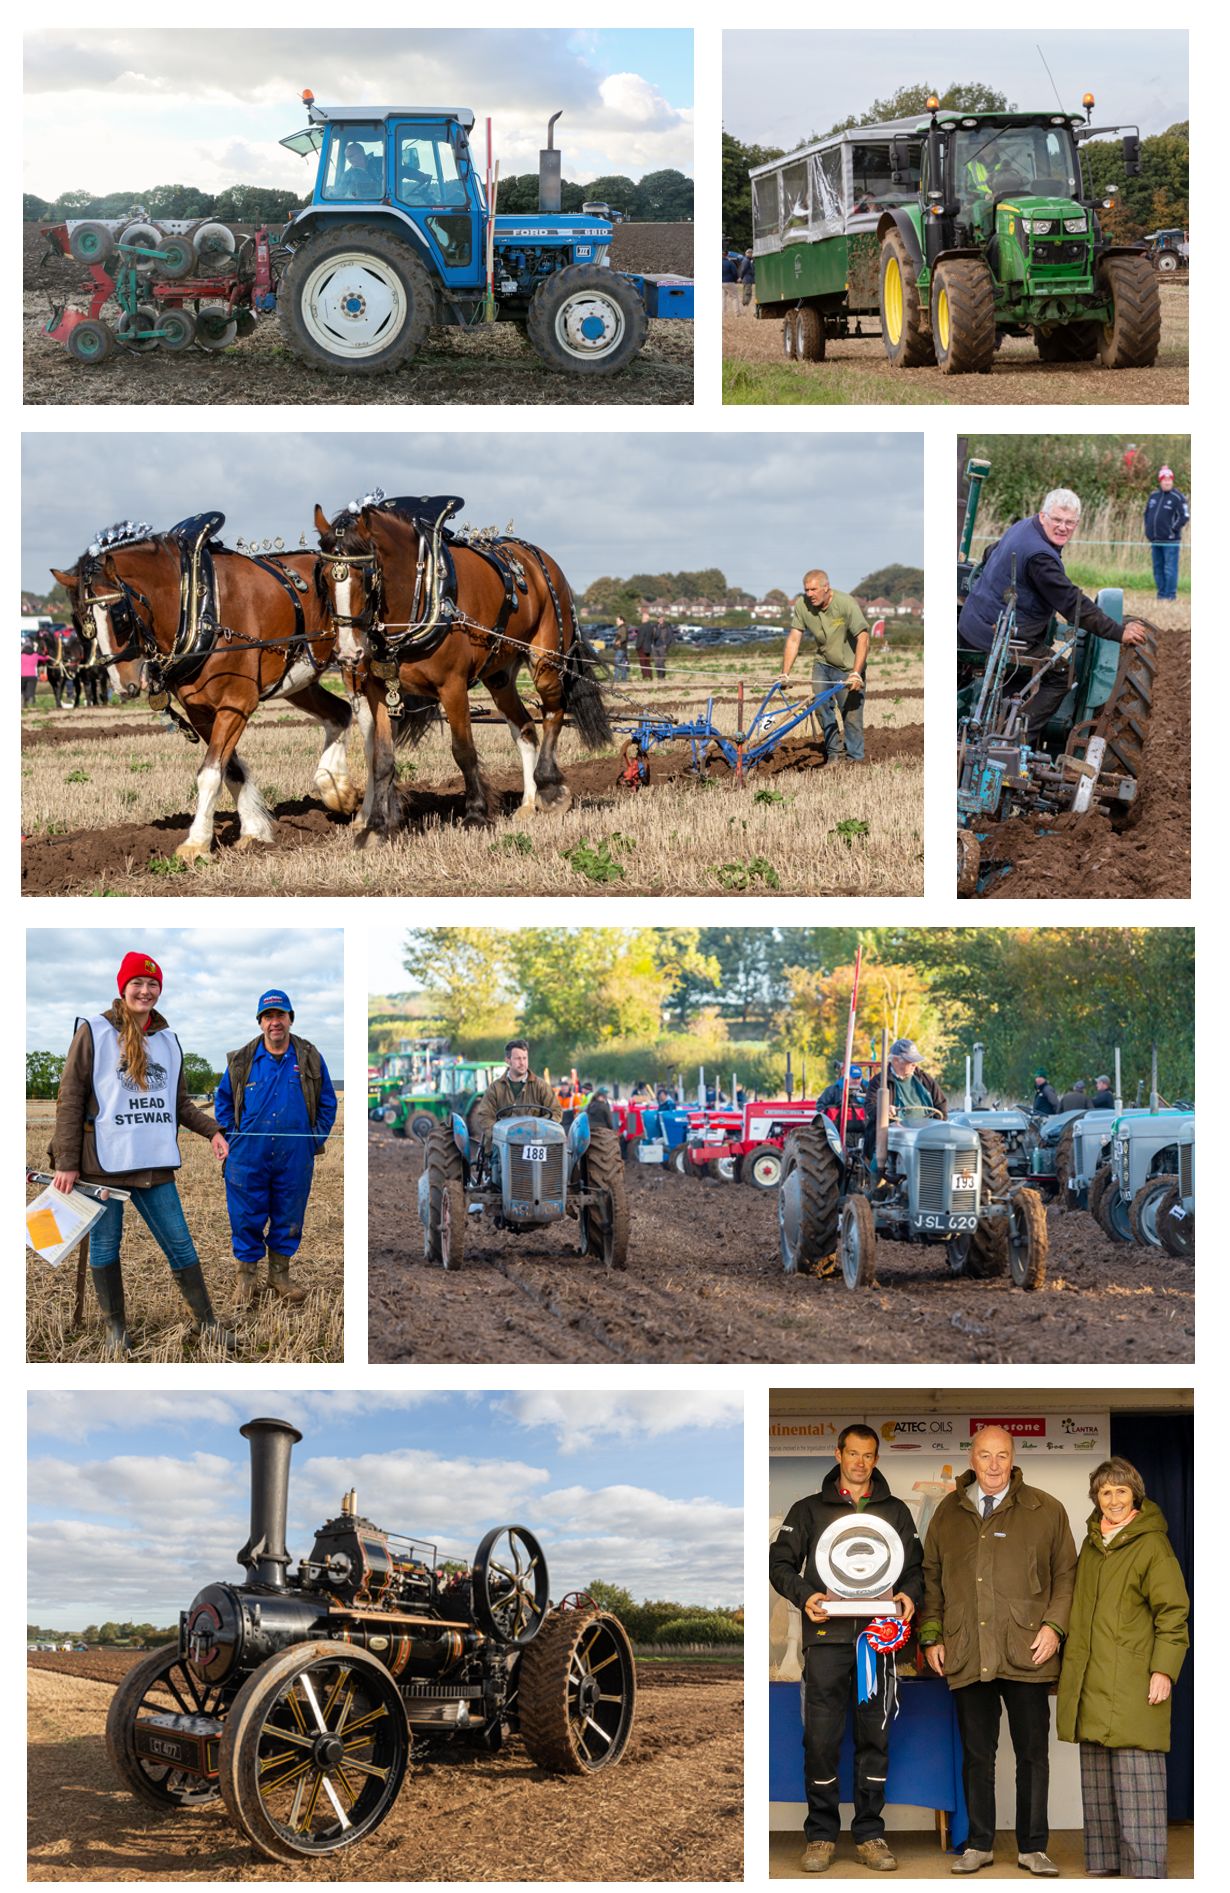 Results of the 71st British National Ploughing Championships